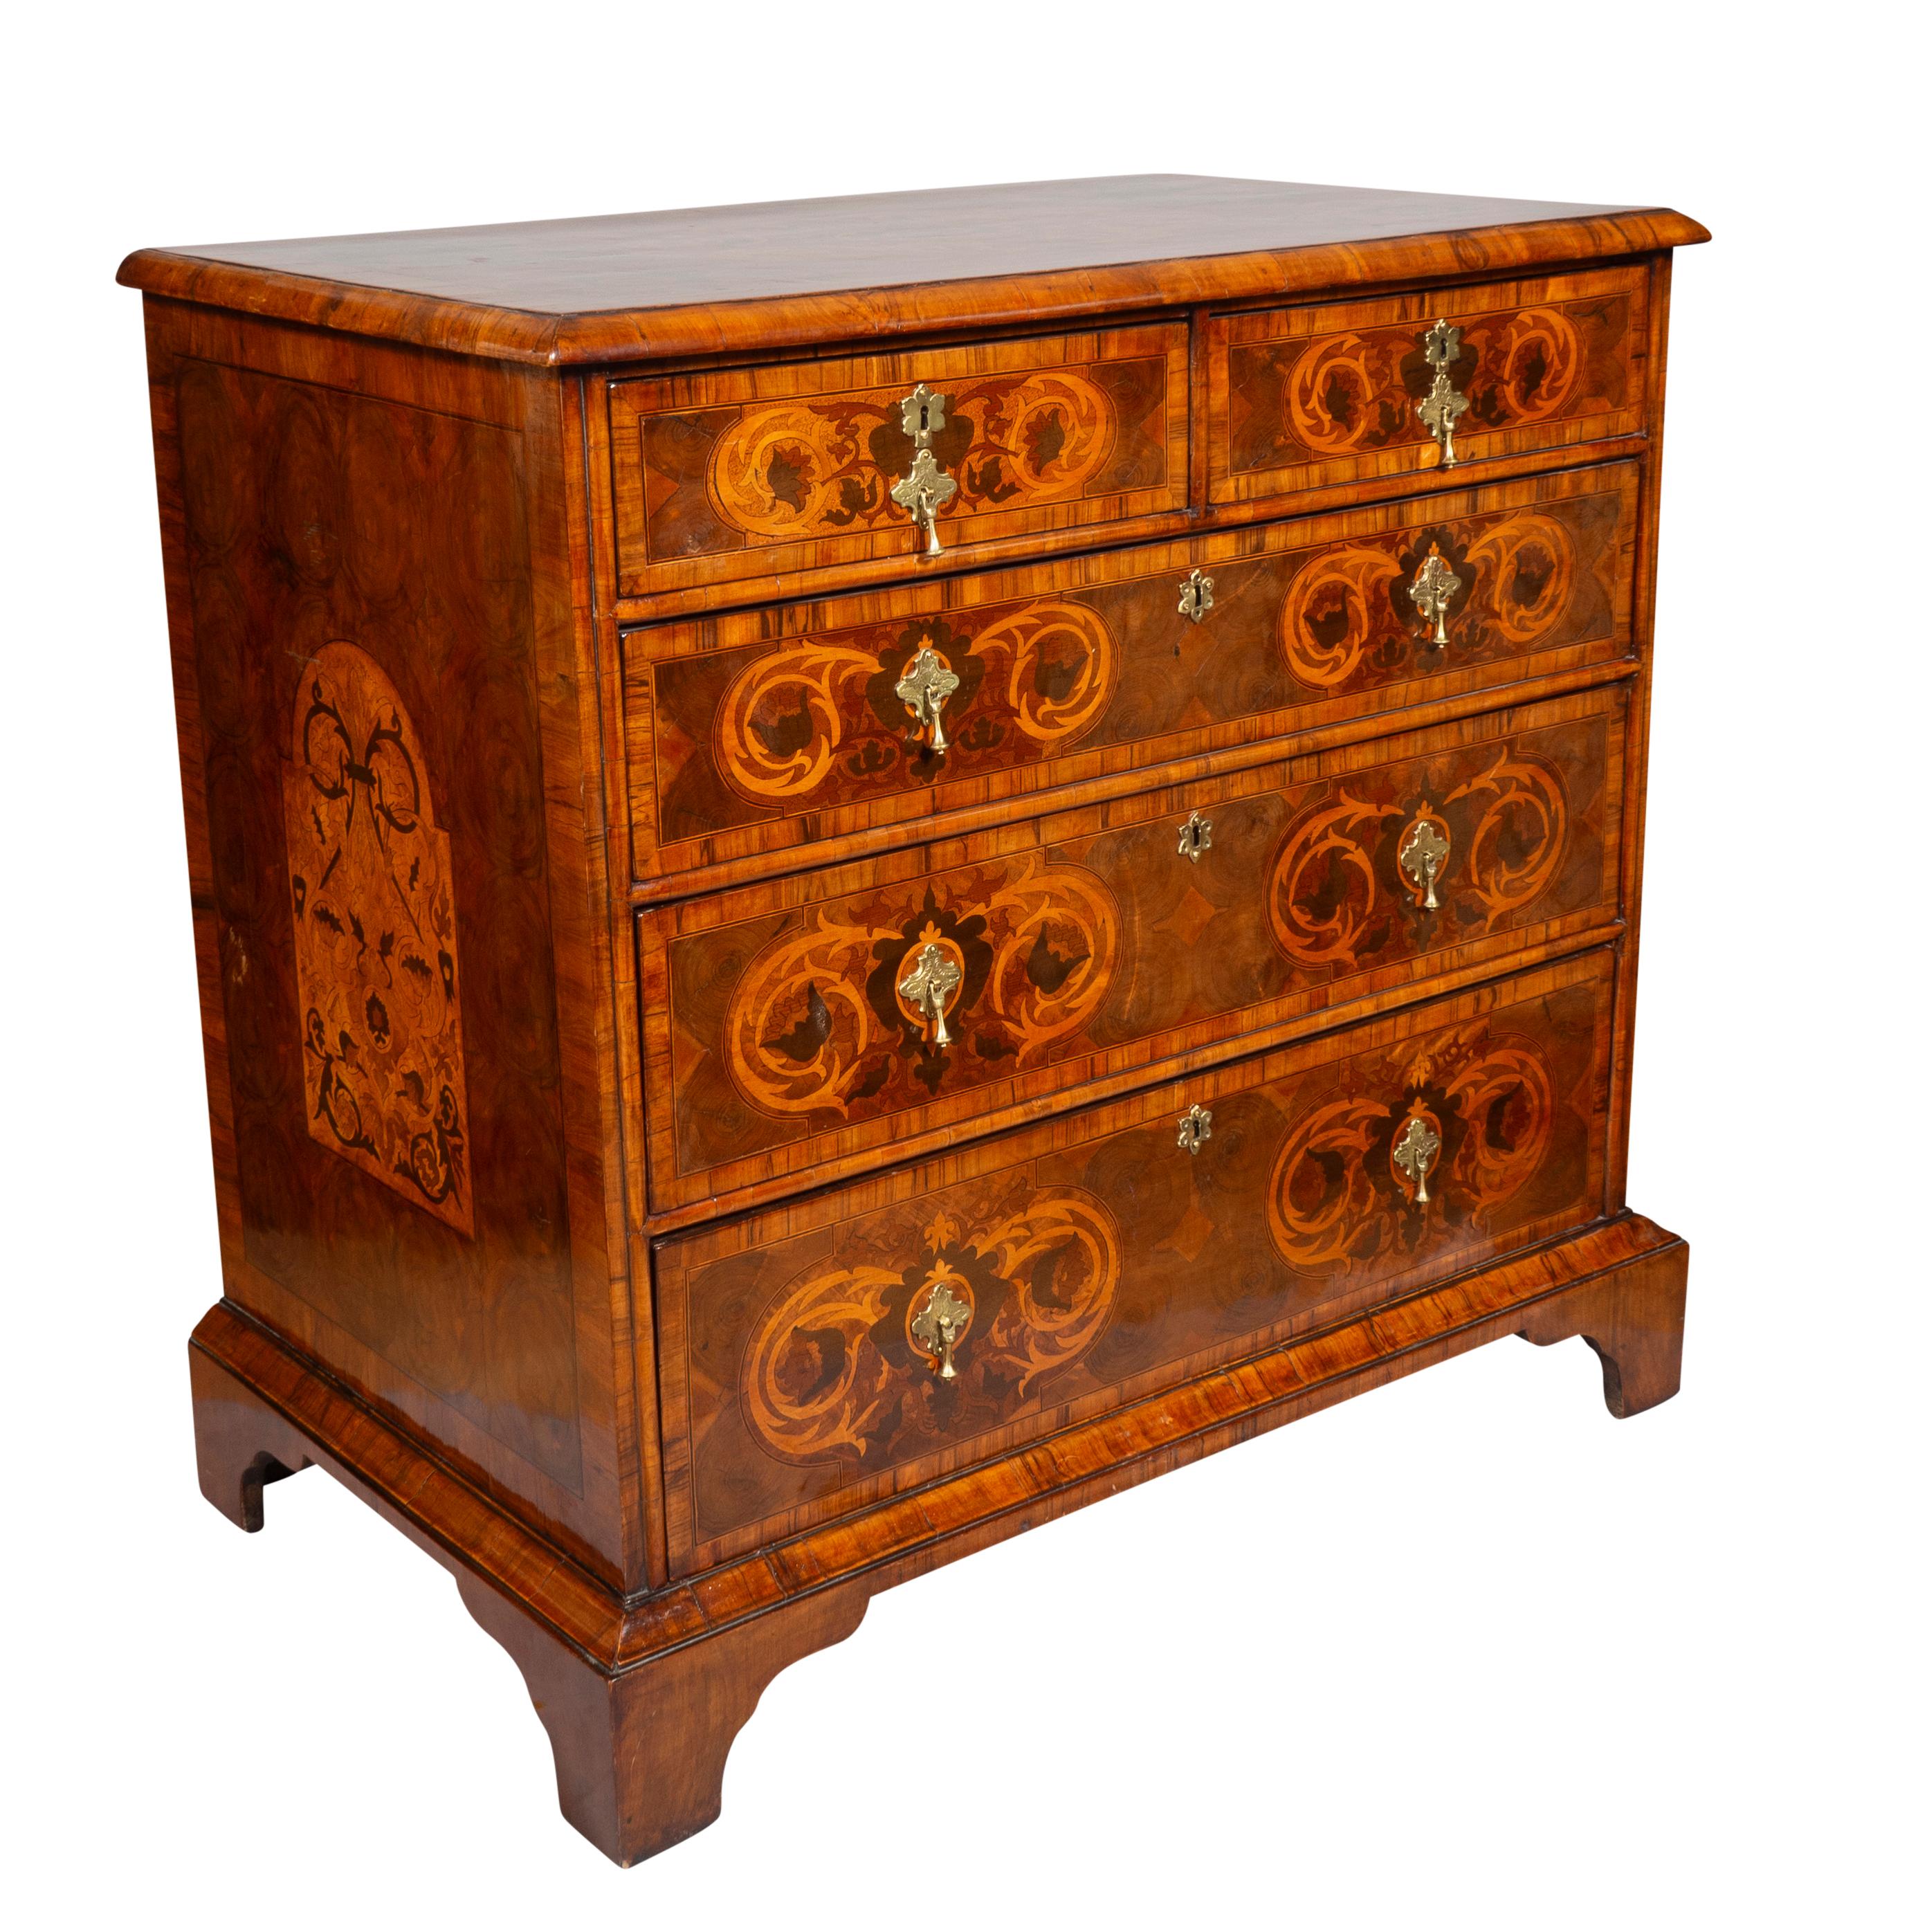 Rectangular top with central oval inlay with matching inlays at corners. Over two over three graduated drawers all with inlays complementing the top. Sides with central inlaid panels. Bracket feet. Brass tear drop handles. Provenance: Antonio's